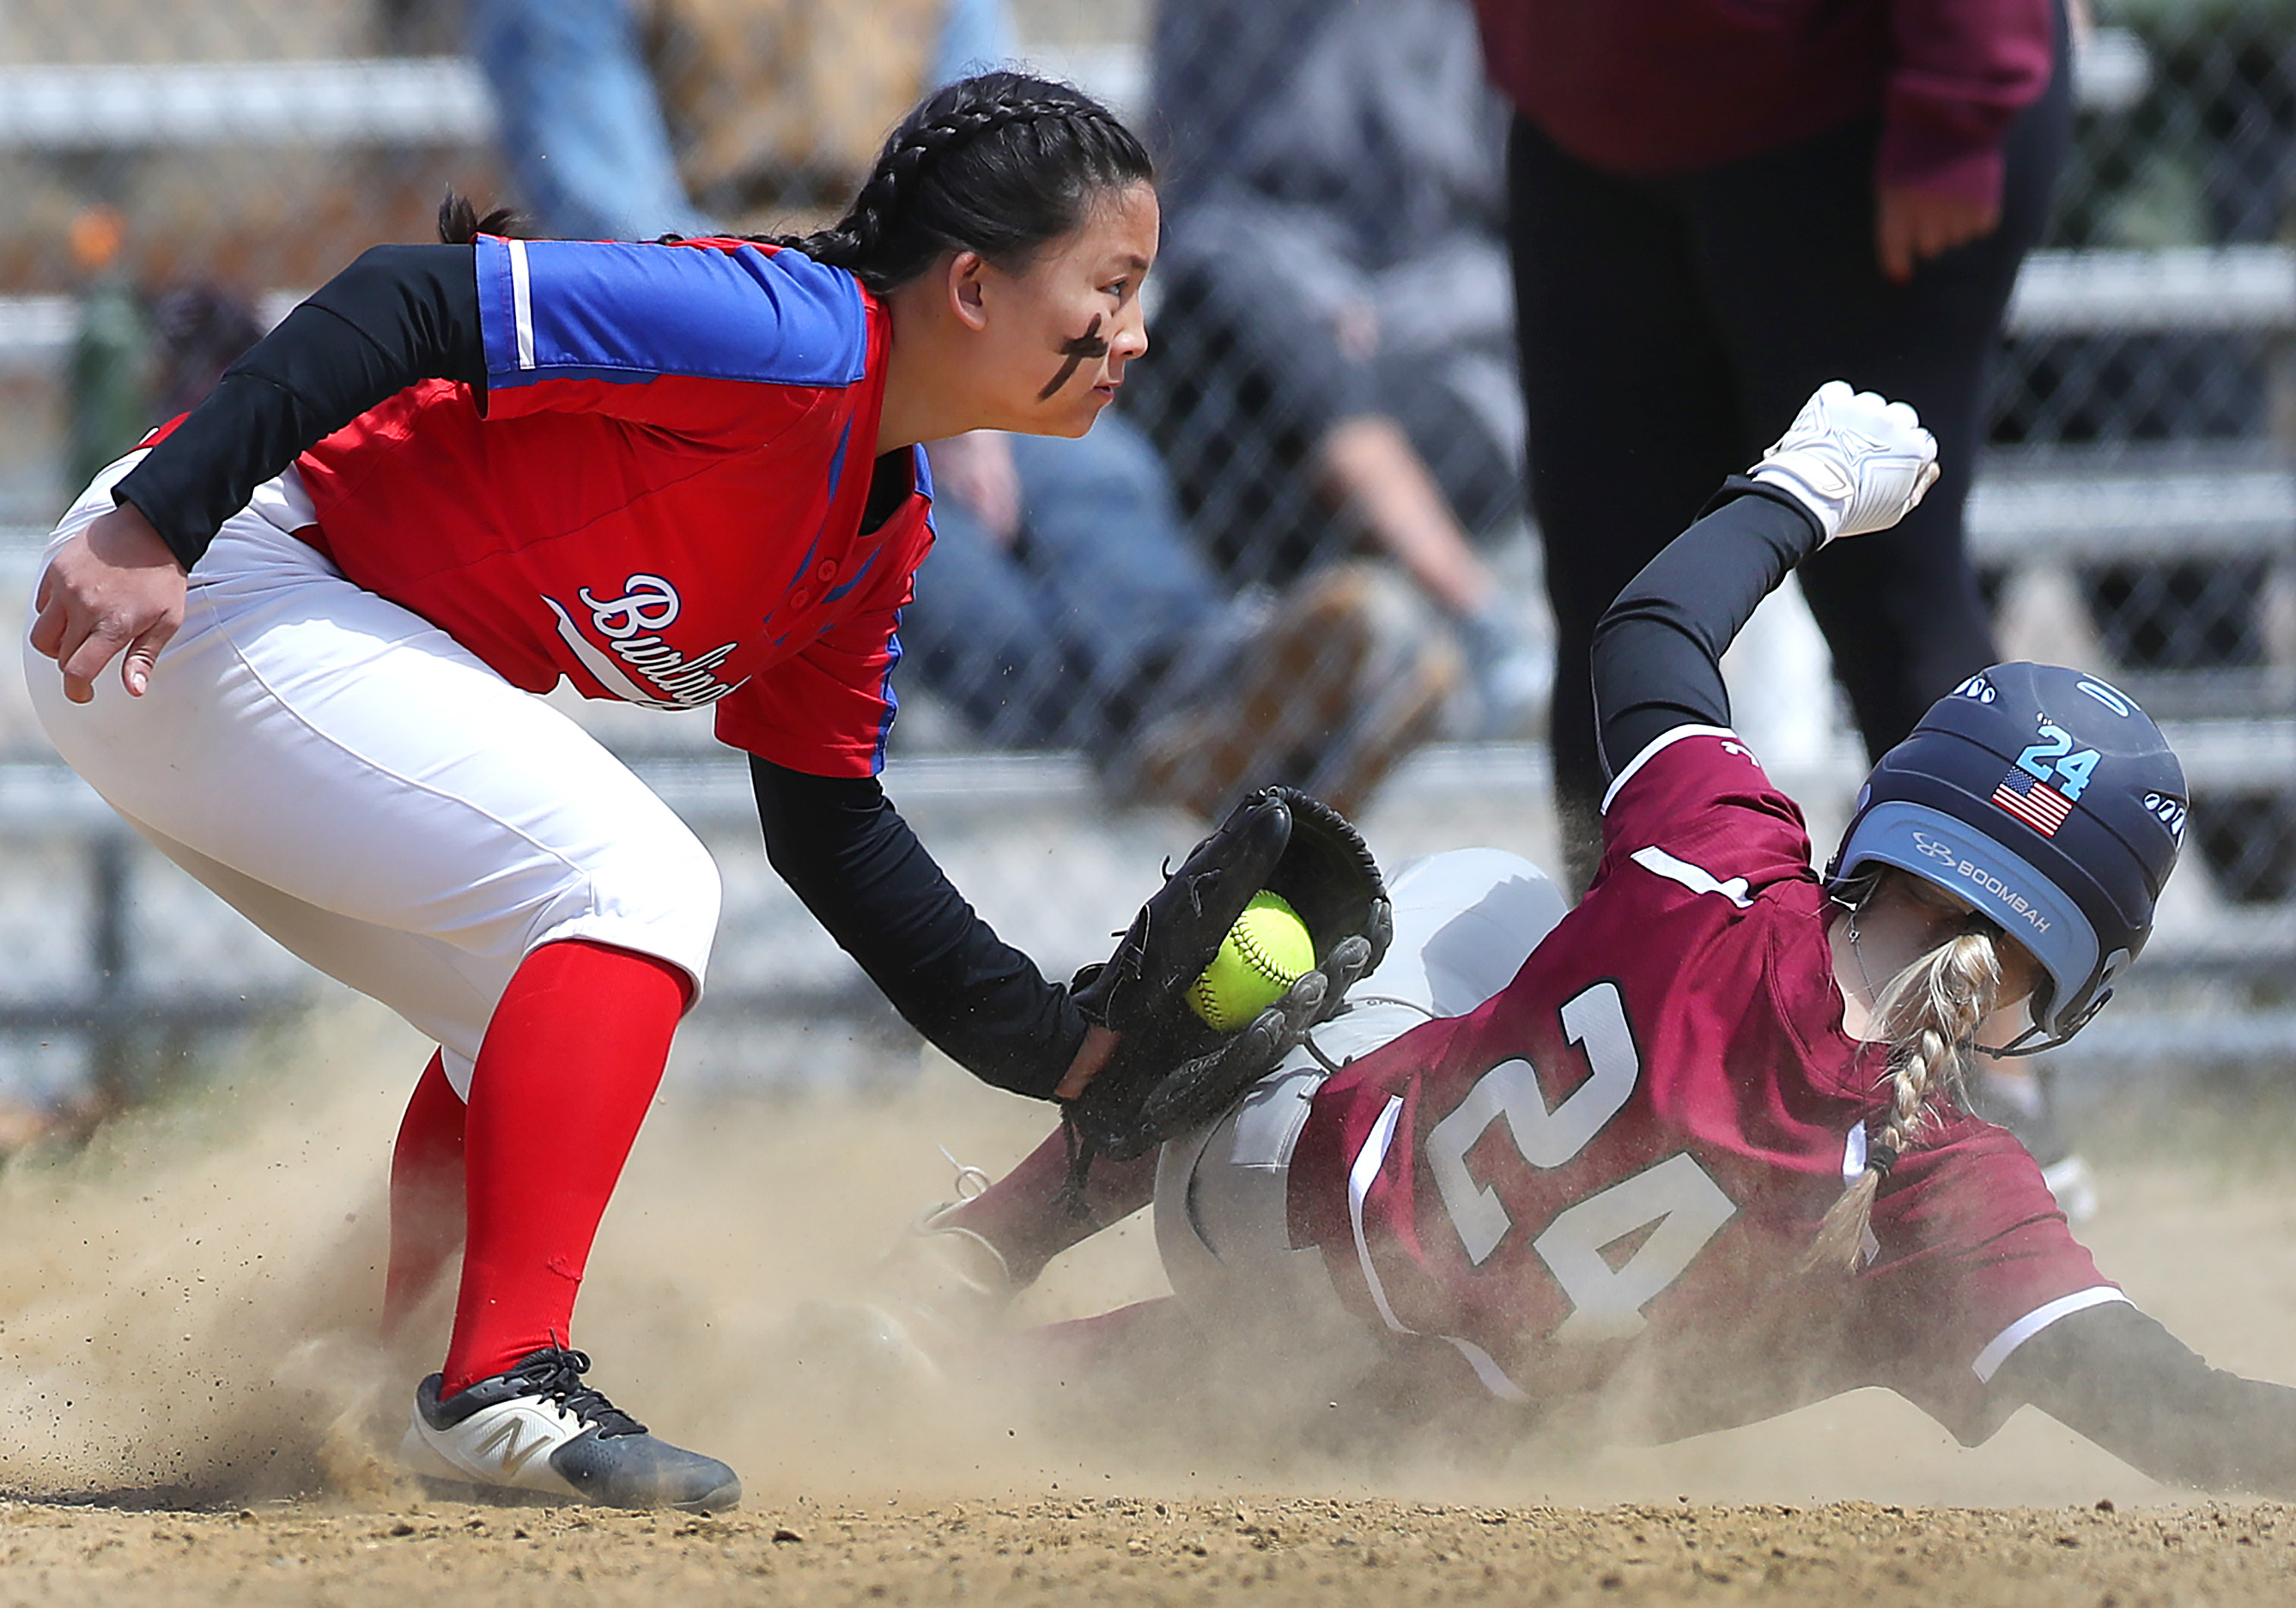 Latin Academy clinches its 15th City League softball title in a rout over  East Boston - The Boston Globe